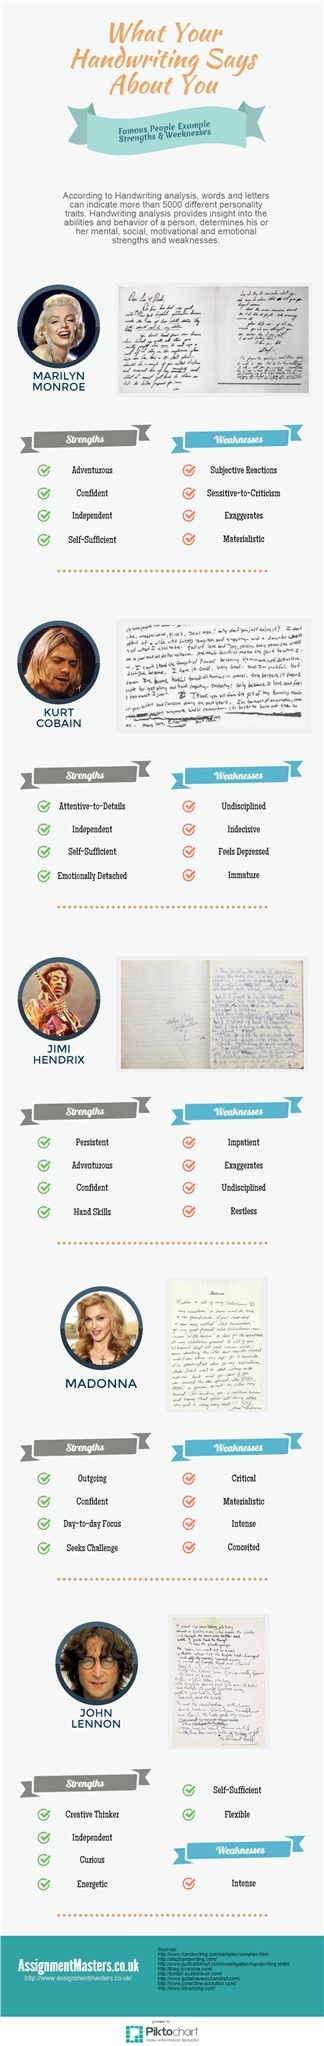 What Does Your Handwriting Reveal About Your Personality?